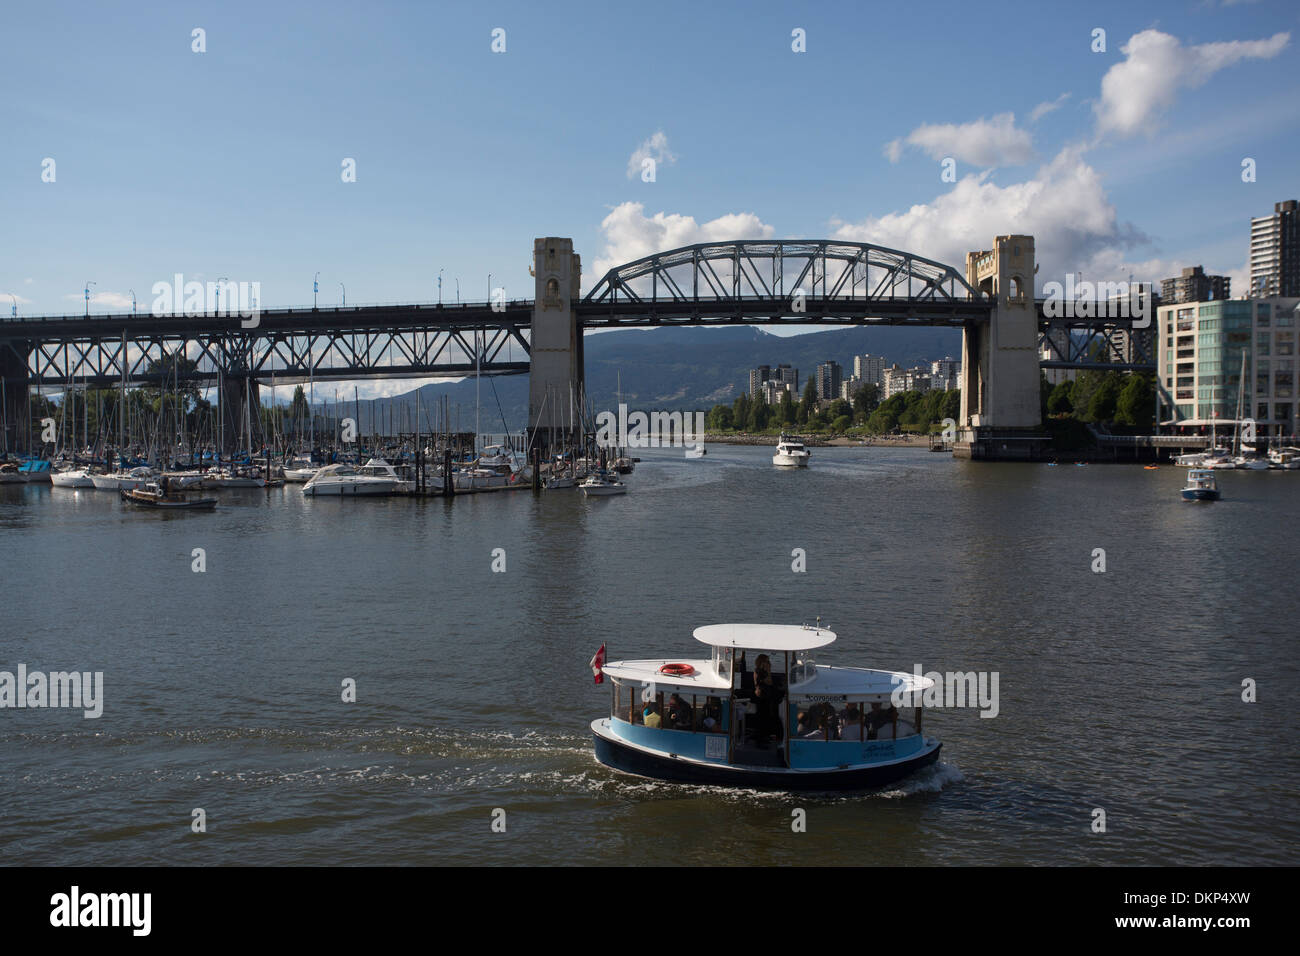 Burrard Bridge in Vancouver, BC, with ferry in the foreground. Stock Photo